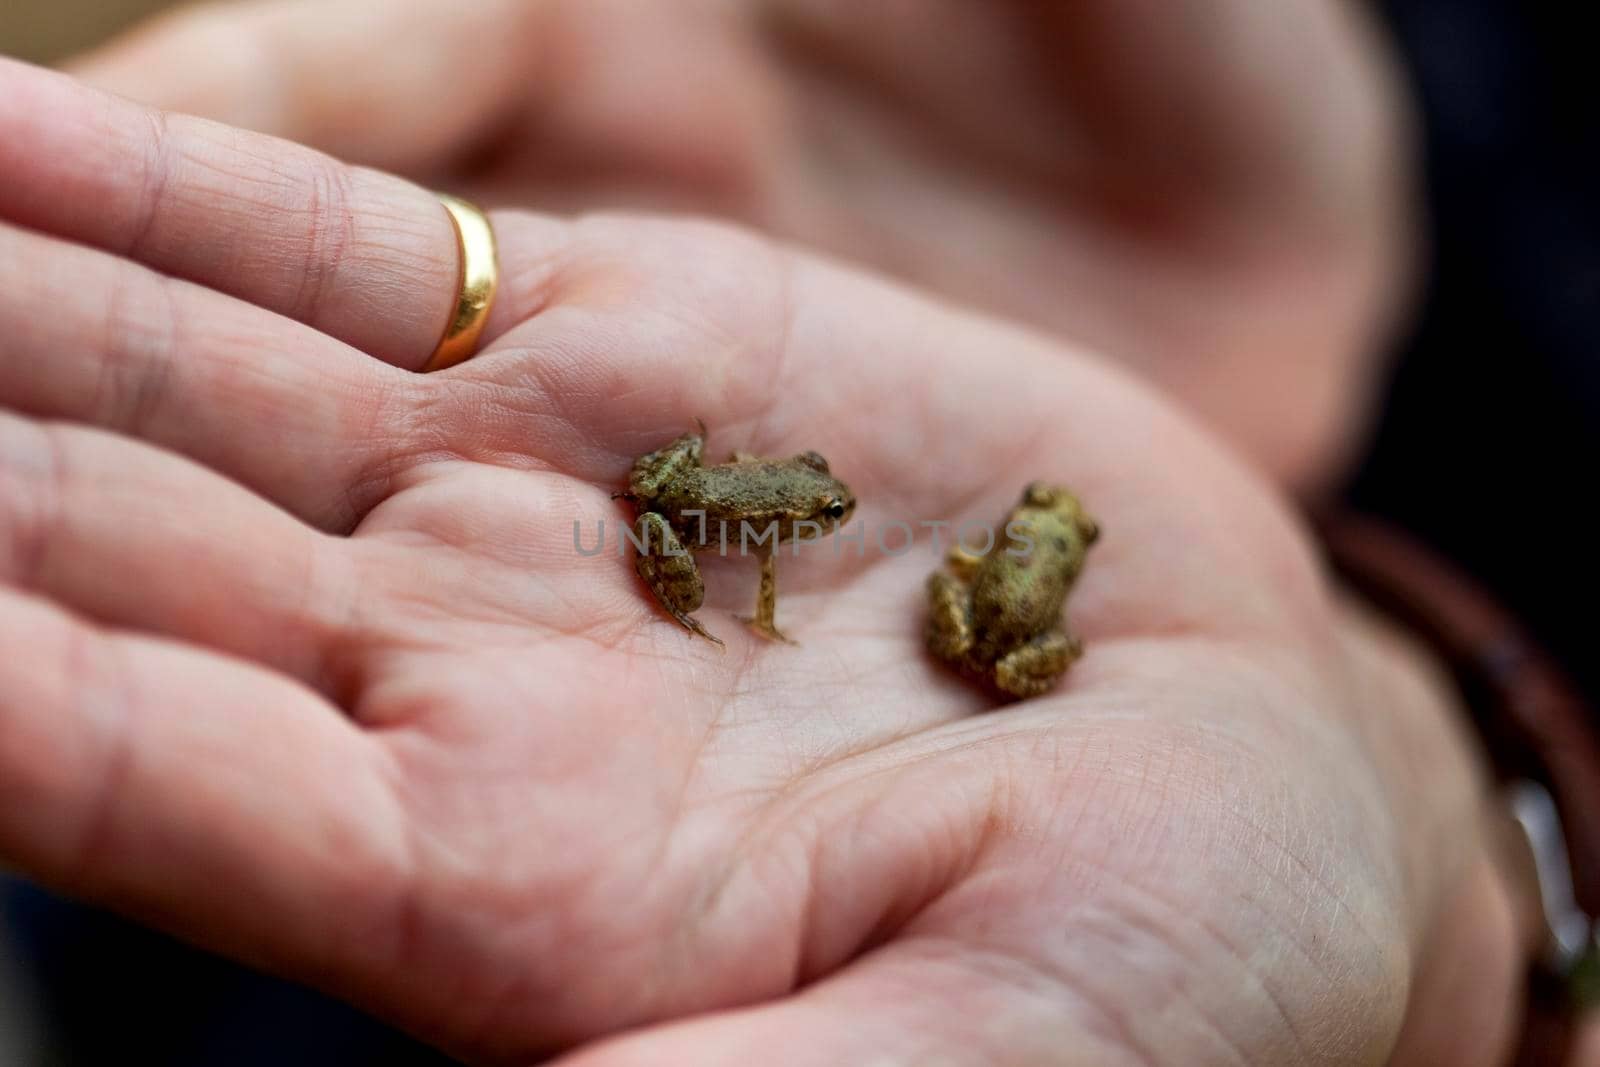 Frogs in a hand by jacques_palut